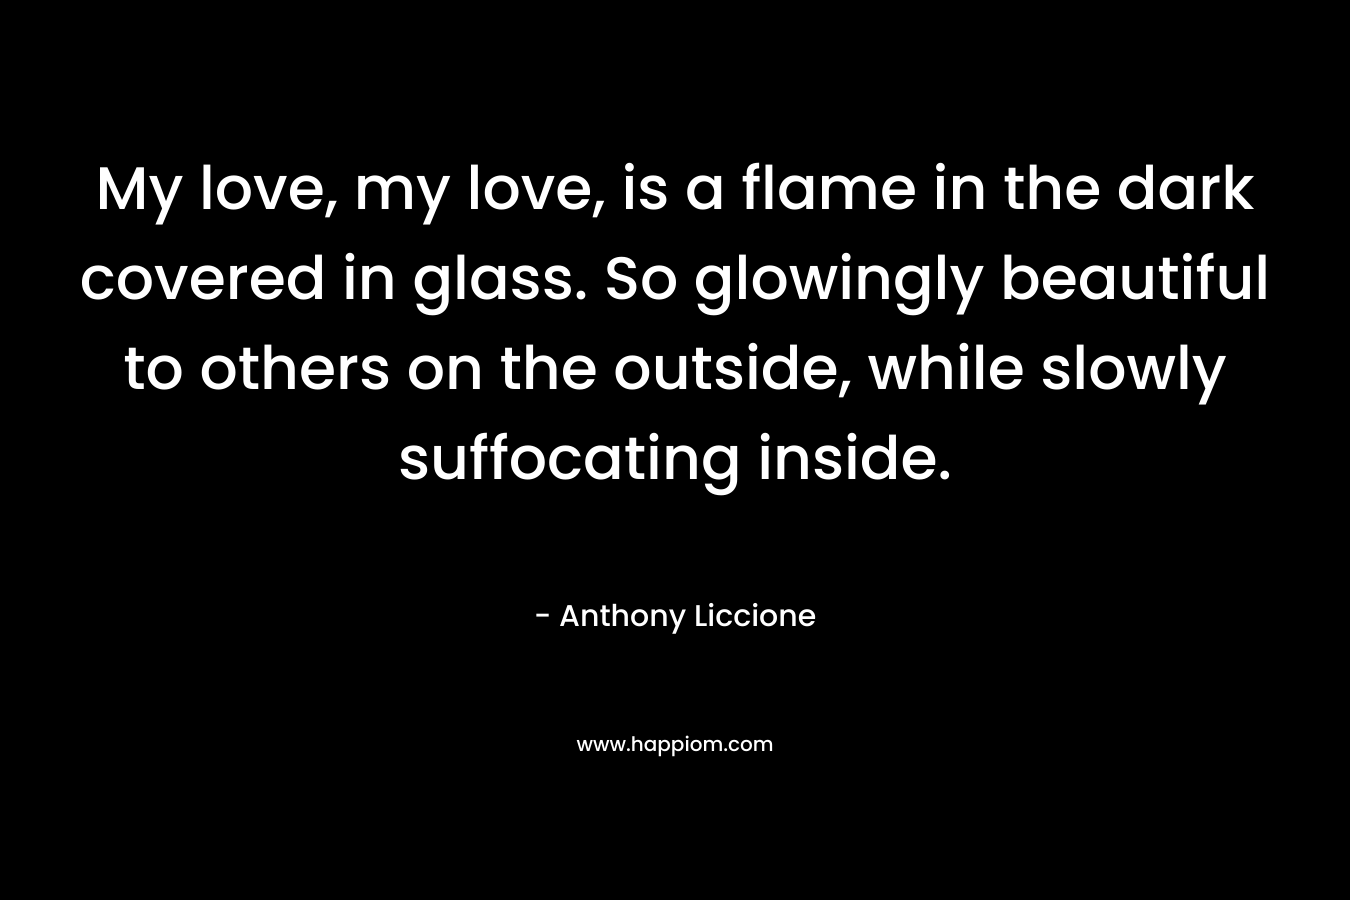 My love, my love, is a flame in the dark covered in glass. So glowingly beautiful to others on the outside, while slowly suffocating inside.